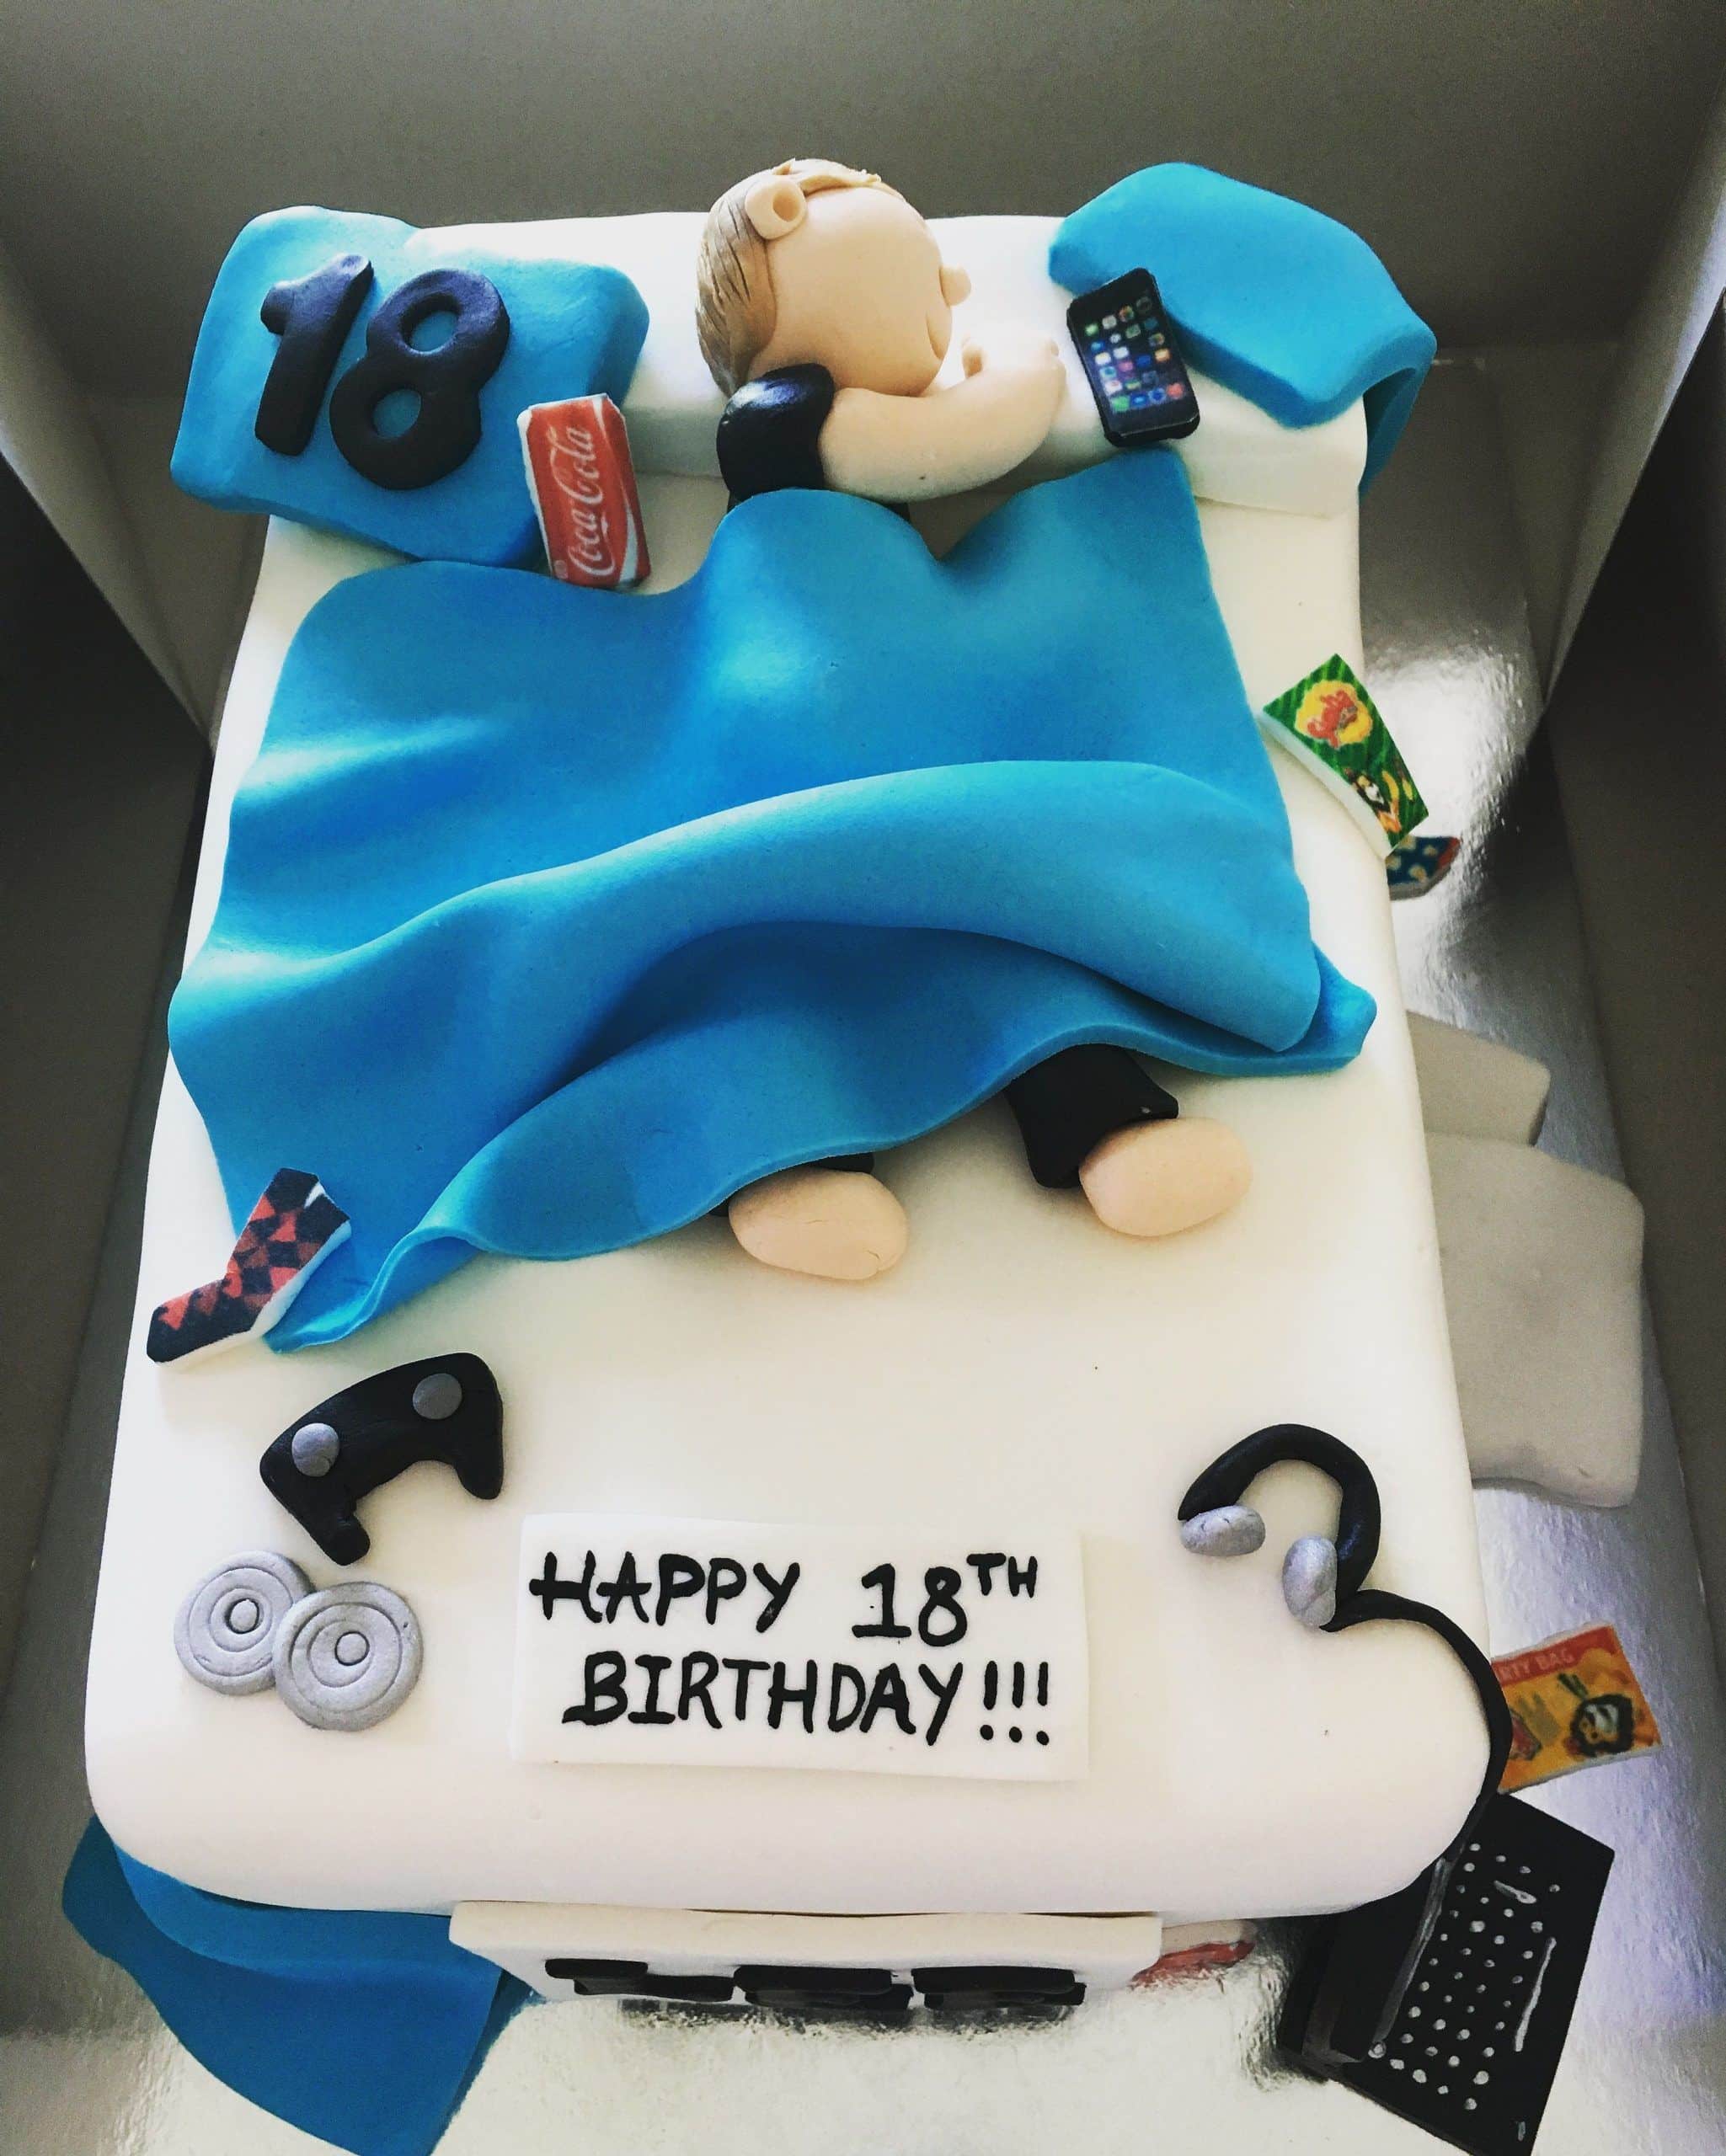 18th Birthday Cakes For Boy in 2020